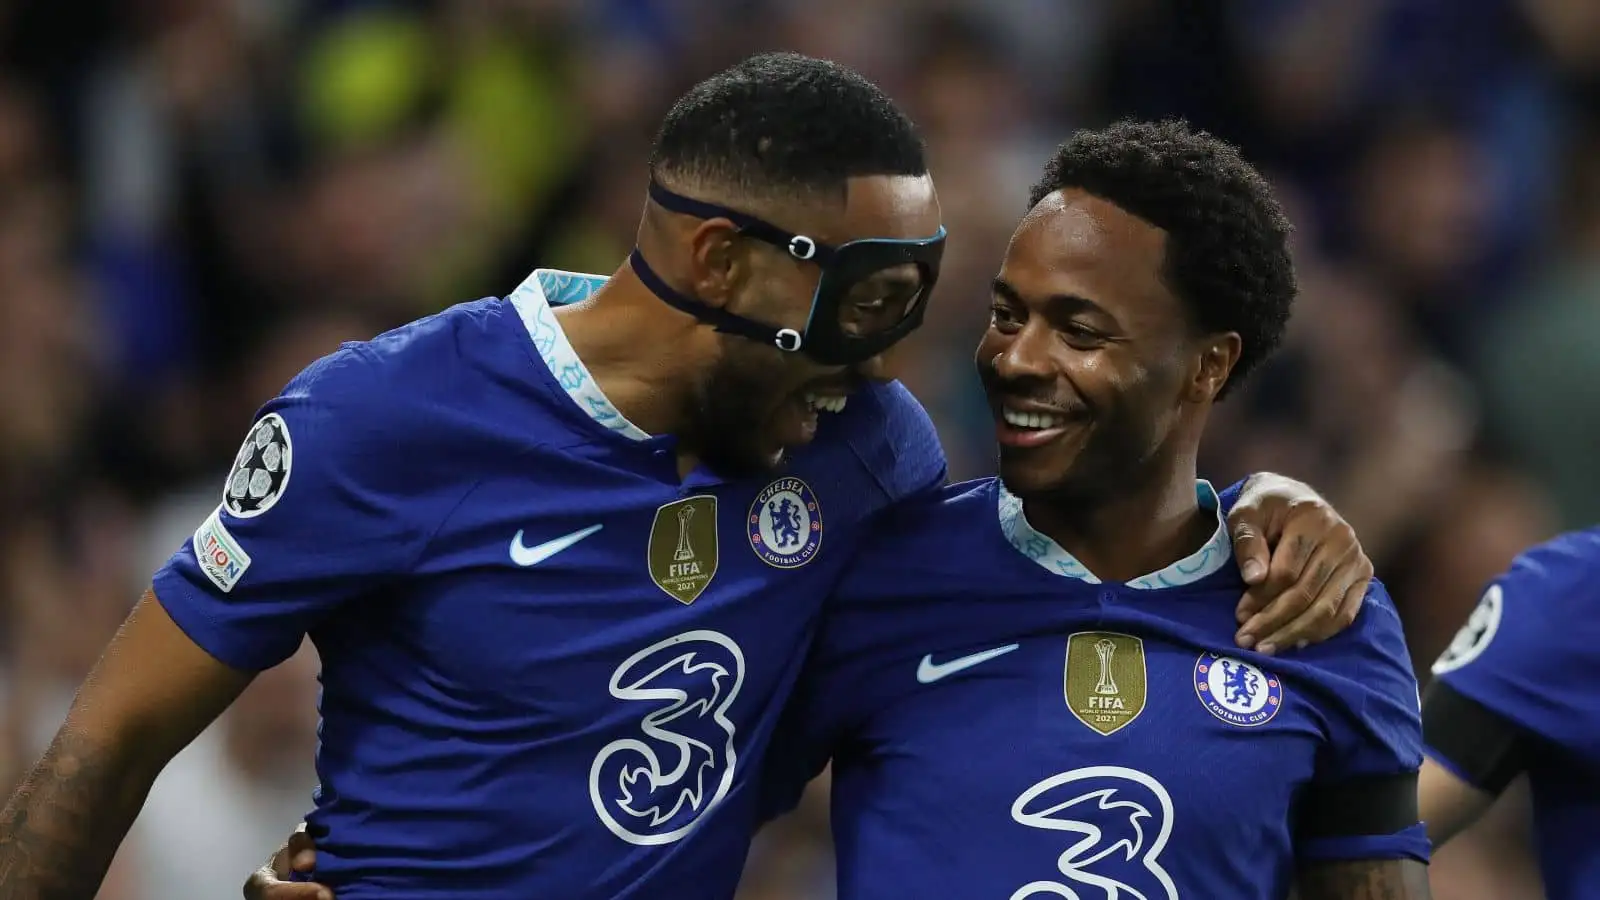 Pierre-Emerick Aubameyang, Raheem Sterling of Chelsea after scoring the opening goal during the UEFA Champions League match at Stamford Bridge